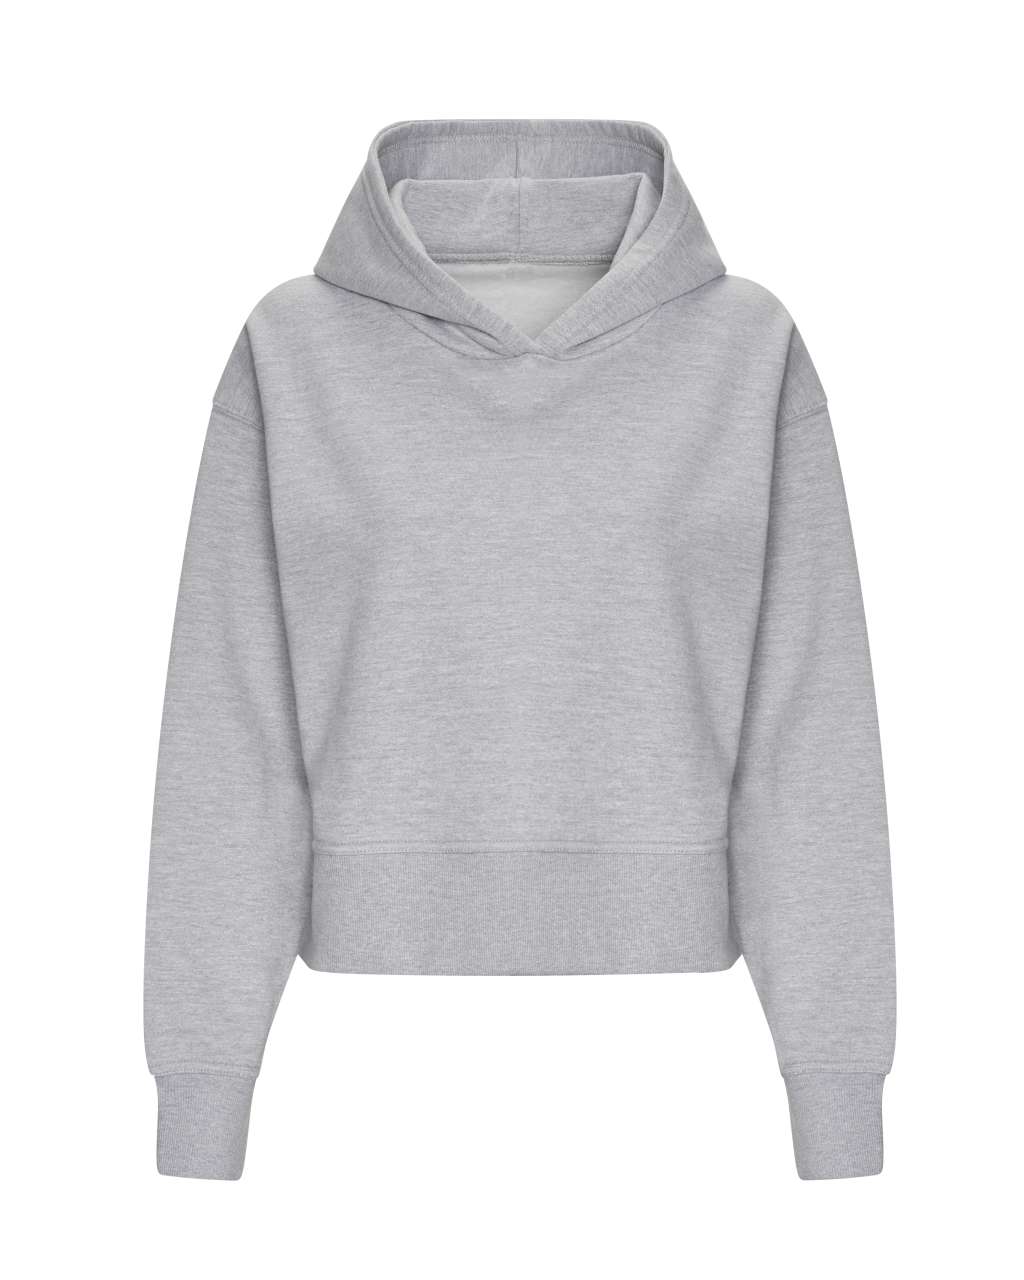 Promo  WOMEN'S RELAXED HOODIE